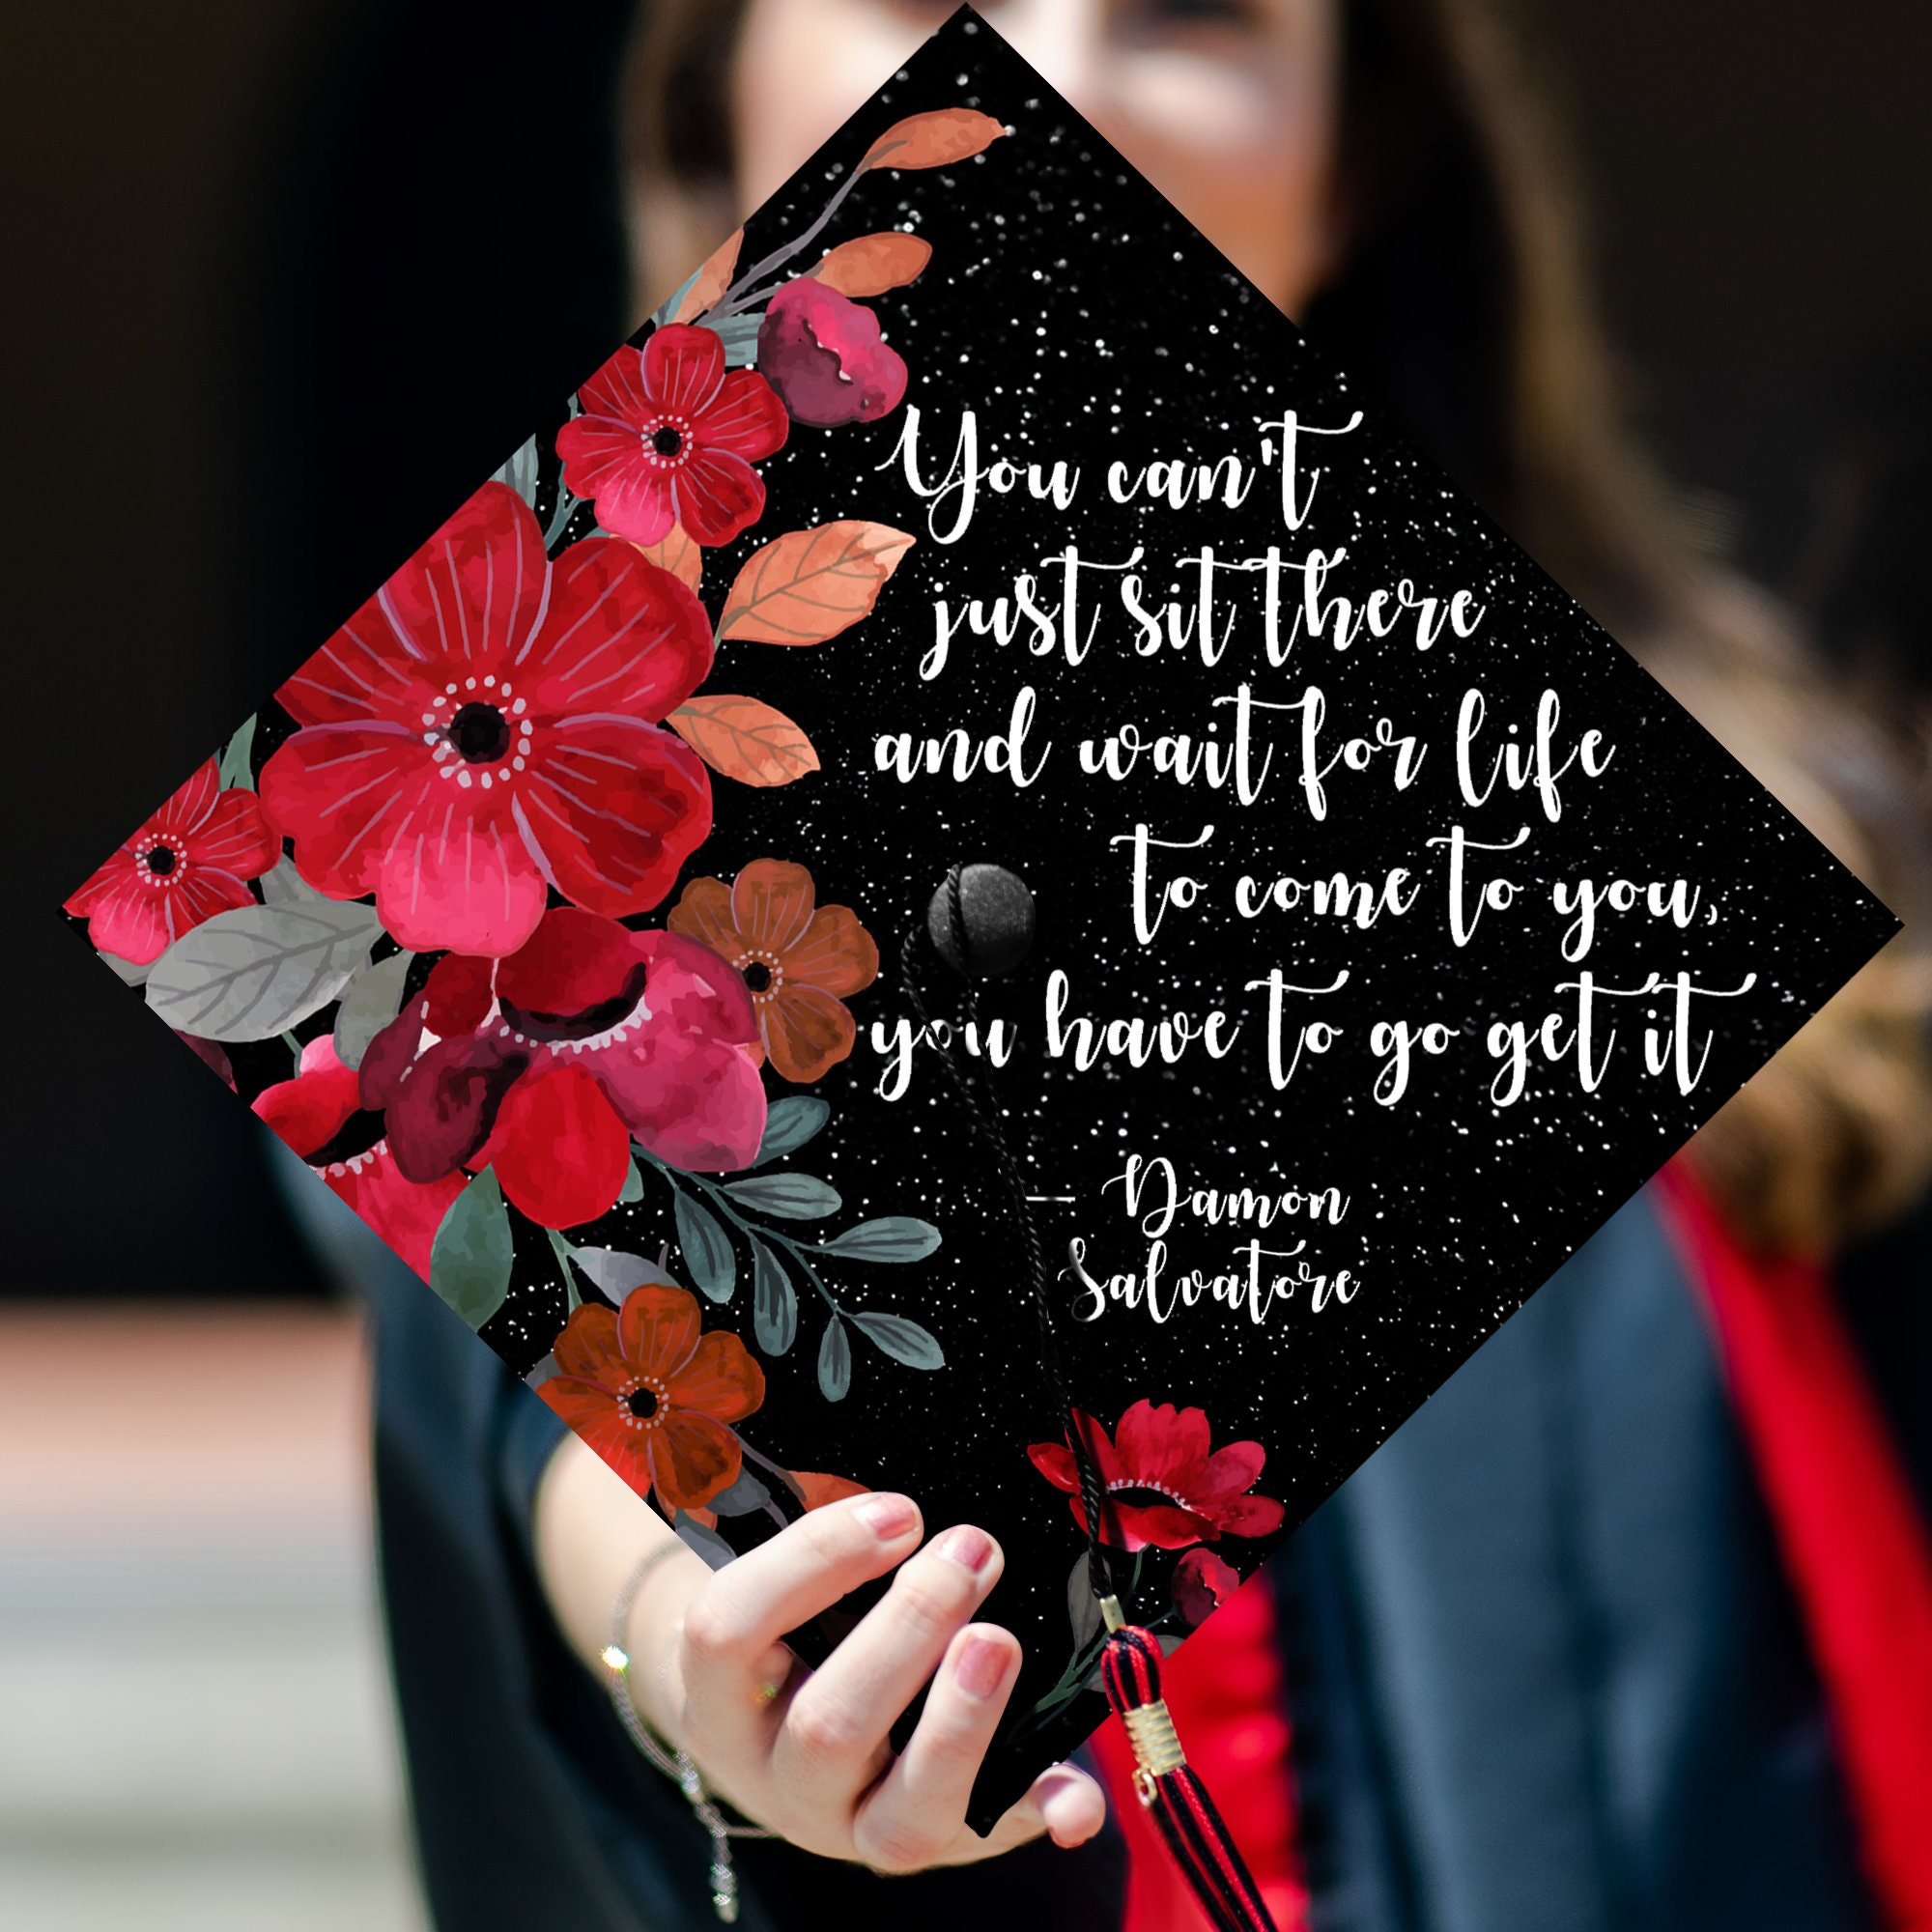 20 Graduation Cap Ideas For The Senior Who Wants To Make All Their Peers  Jealous